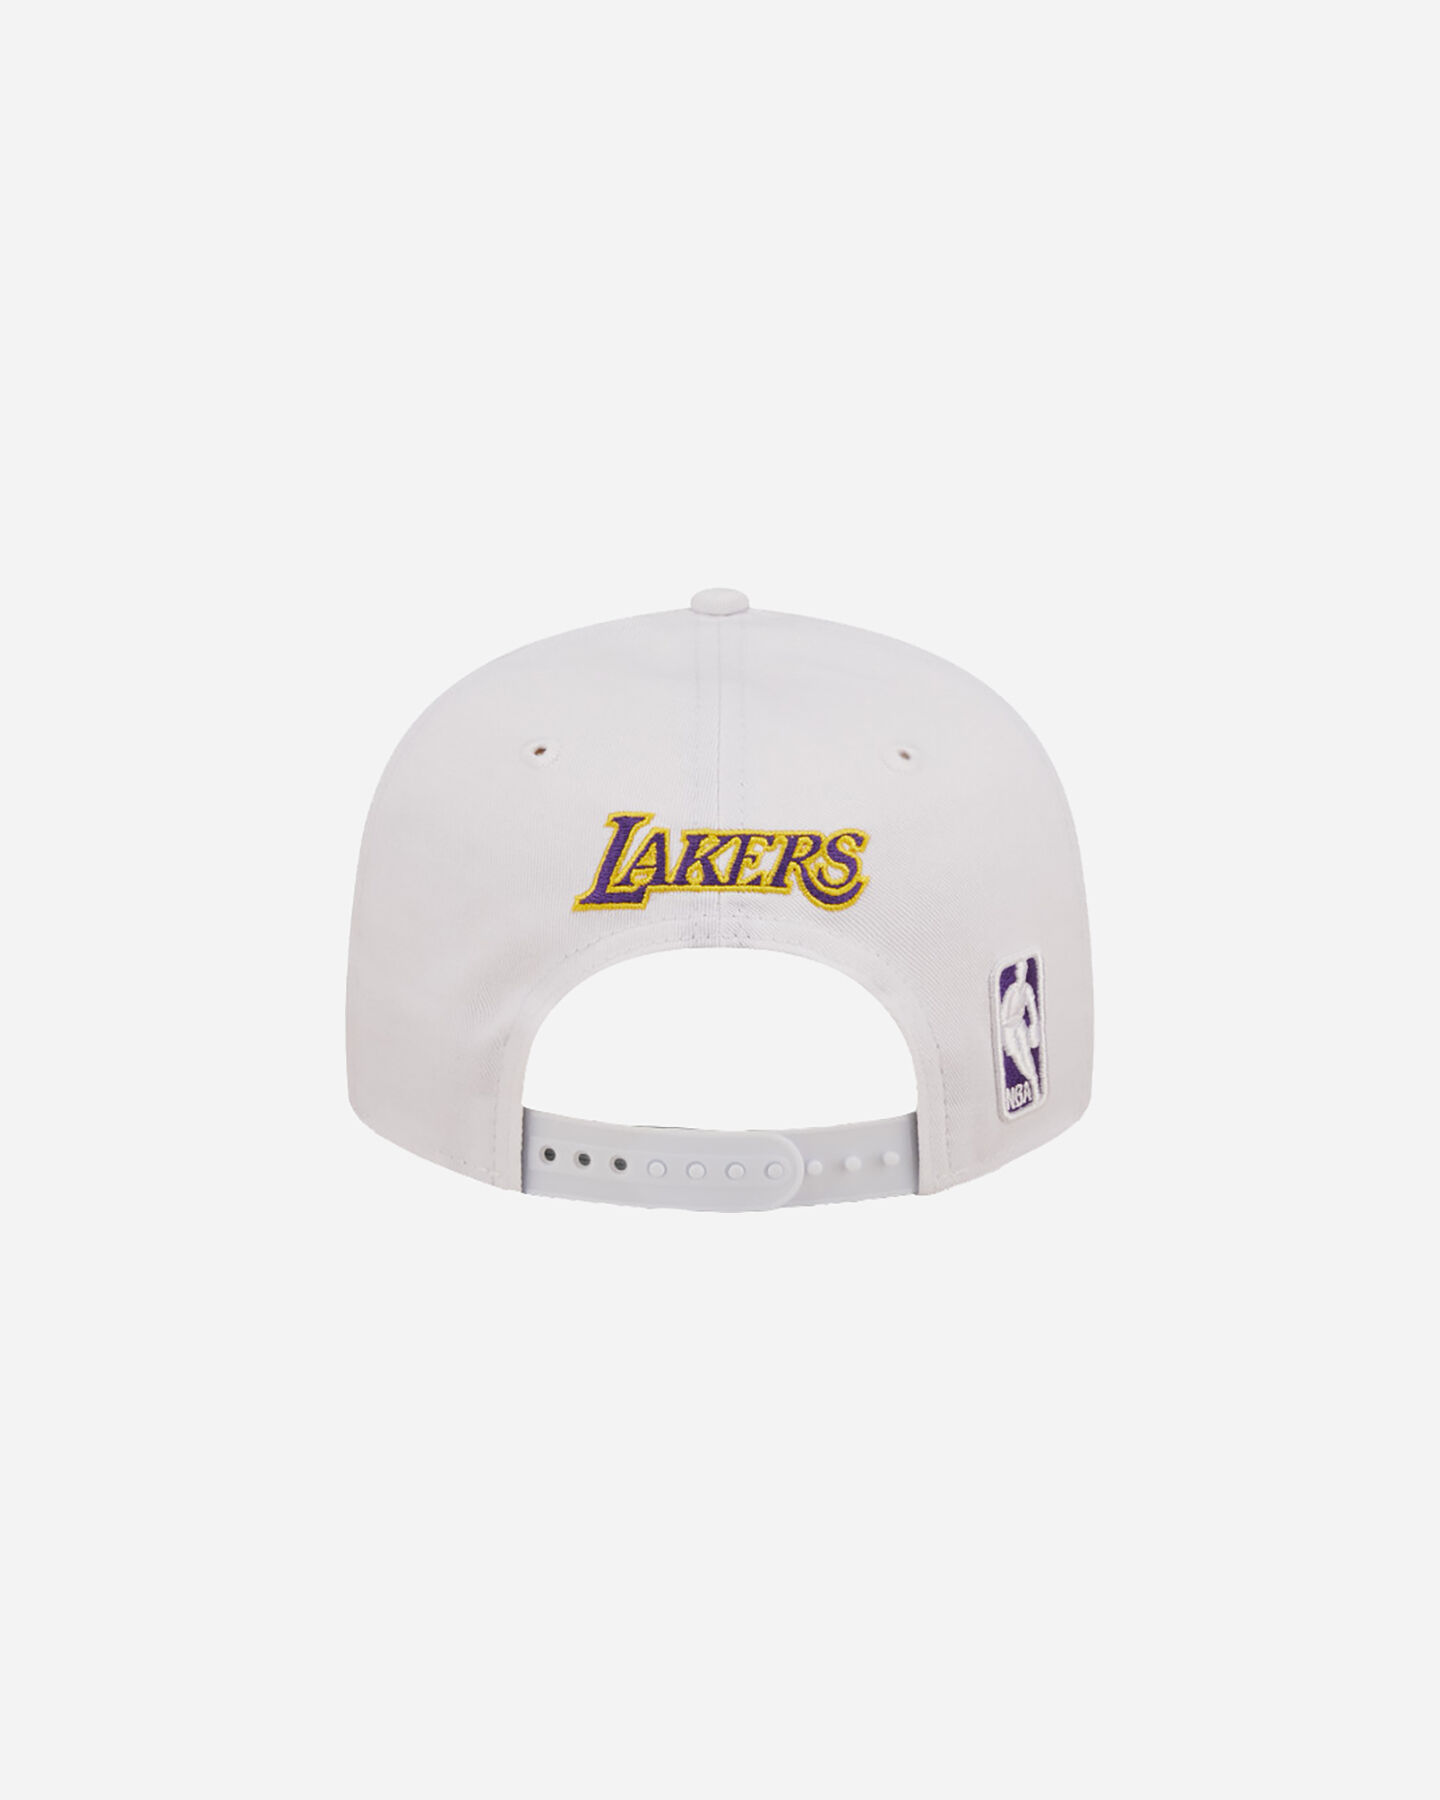  Cappellino NEW ERA 9FIFTY CROWN TEAM LOS LAKERS  S5571083|100|SM scatto 3